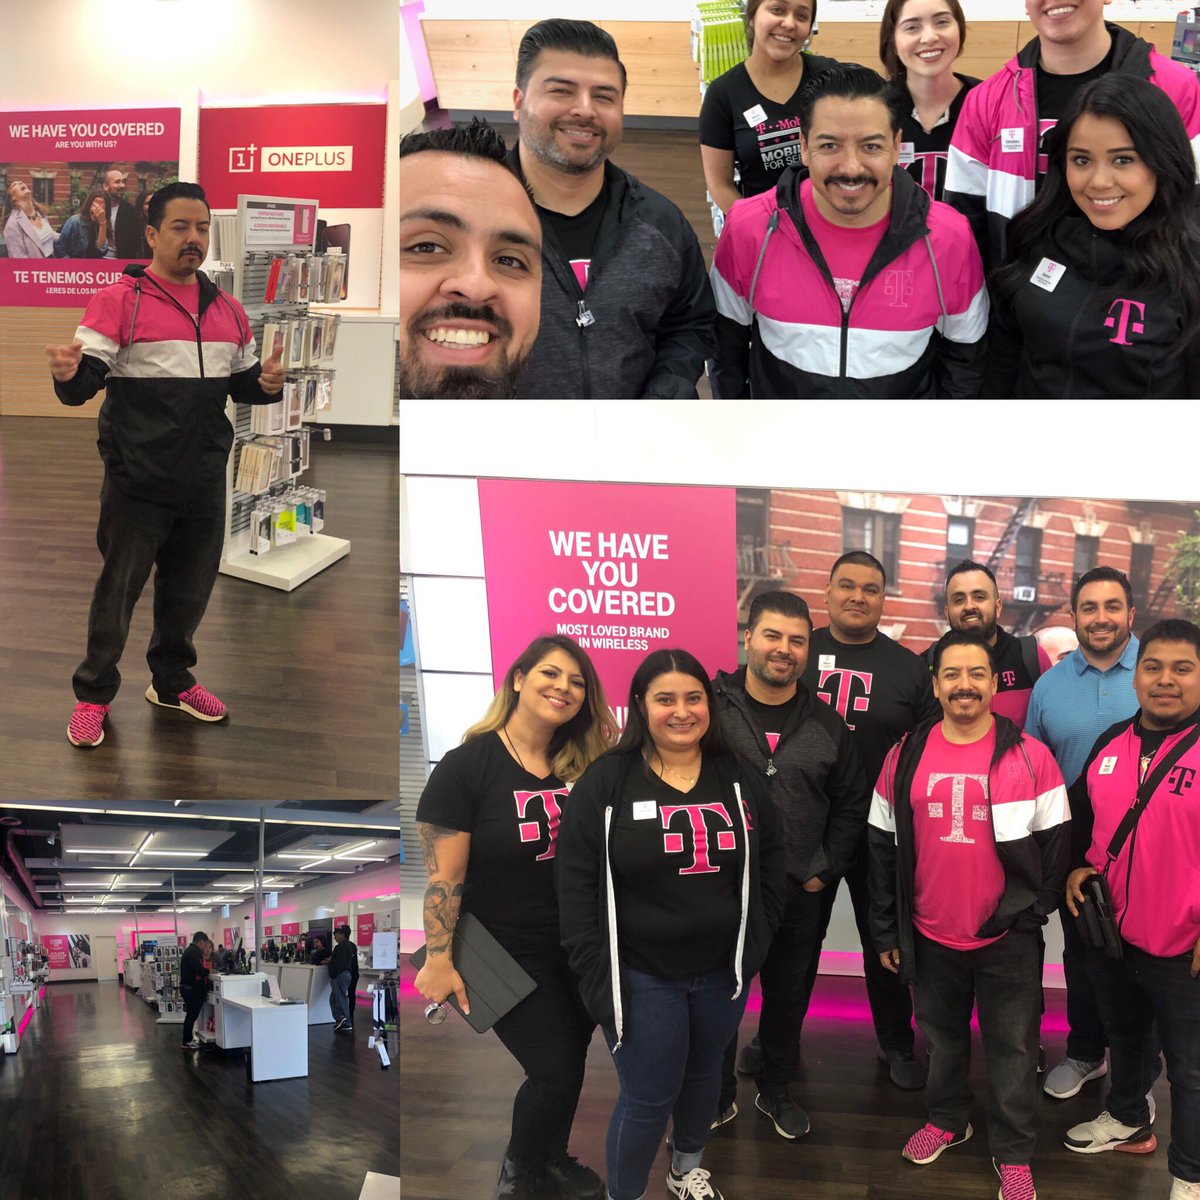 It’s always important to reconnect with your roots.  Thank you @D_Hernan31 for allowing us to visit your TPR partners and start building #OneMarketLA. It was nice to see some familiar faces and bring memories back.... #MagentaHustle